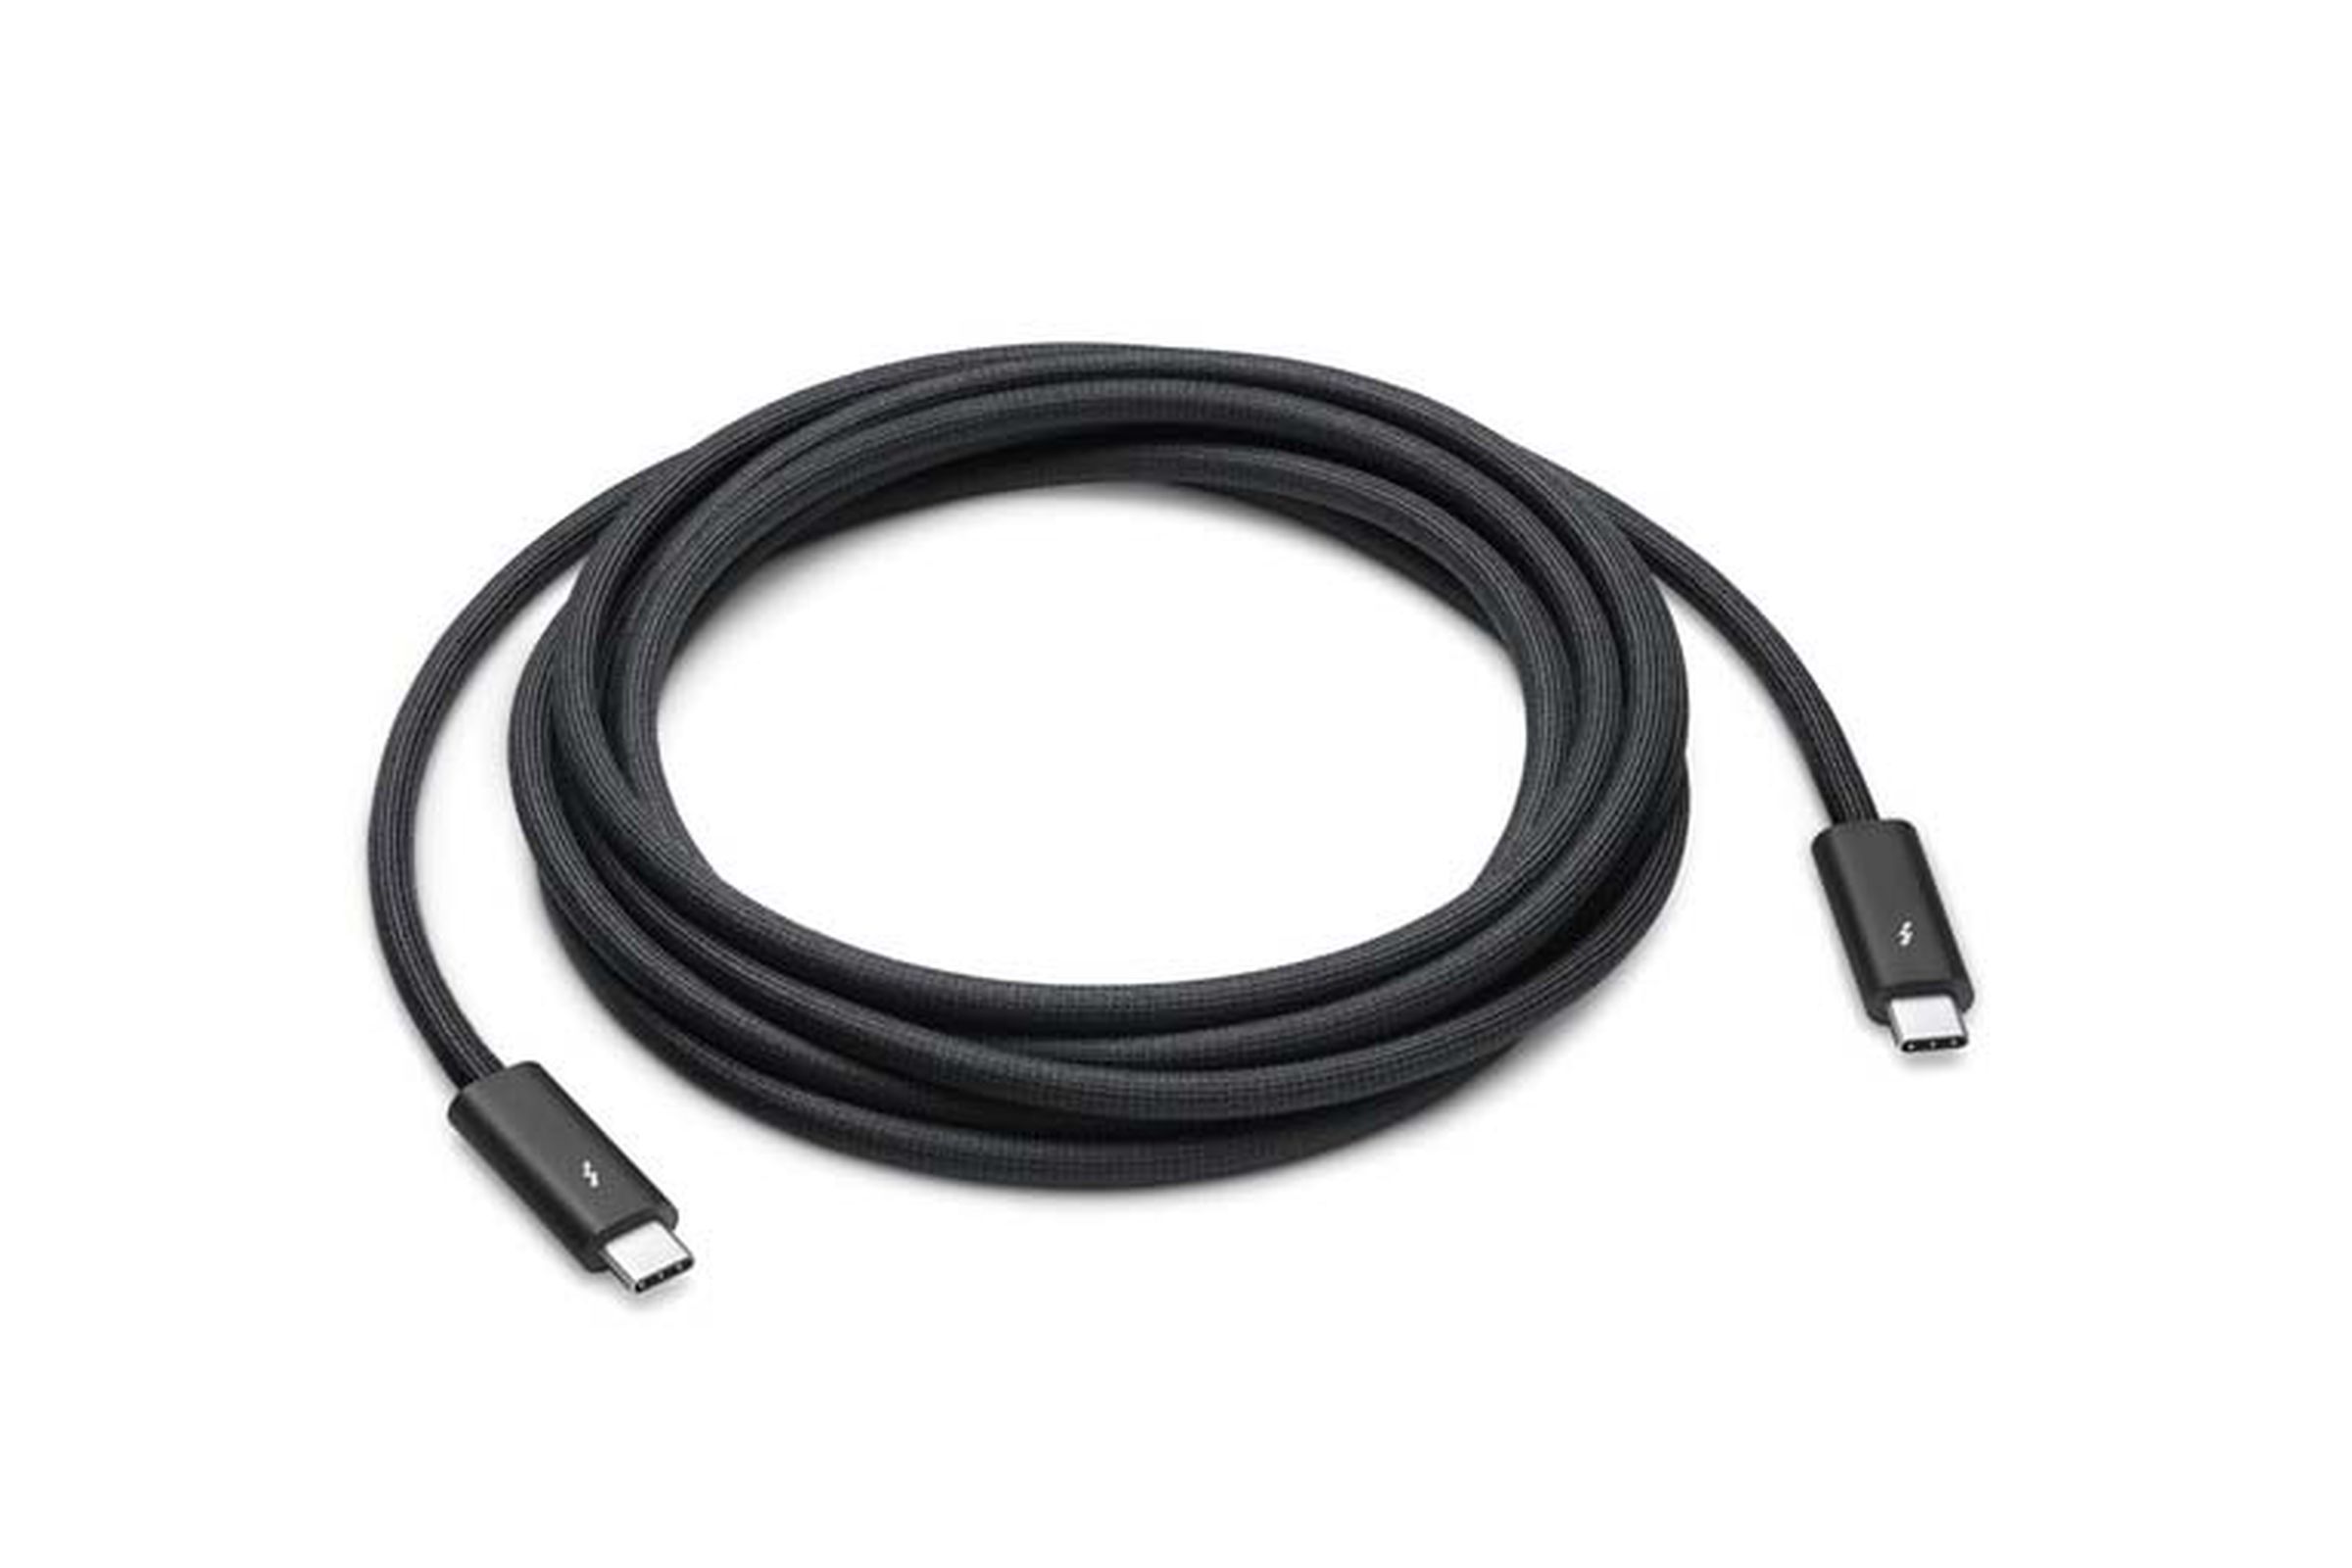 Apple’s 3-meter long Thunderbolt 4 cable.